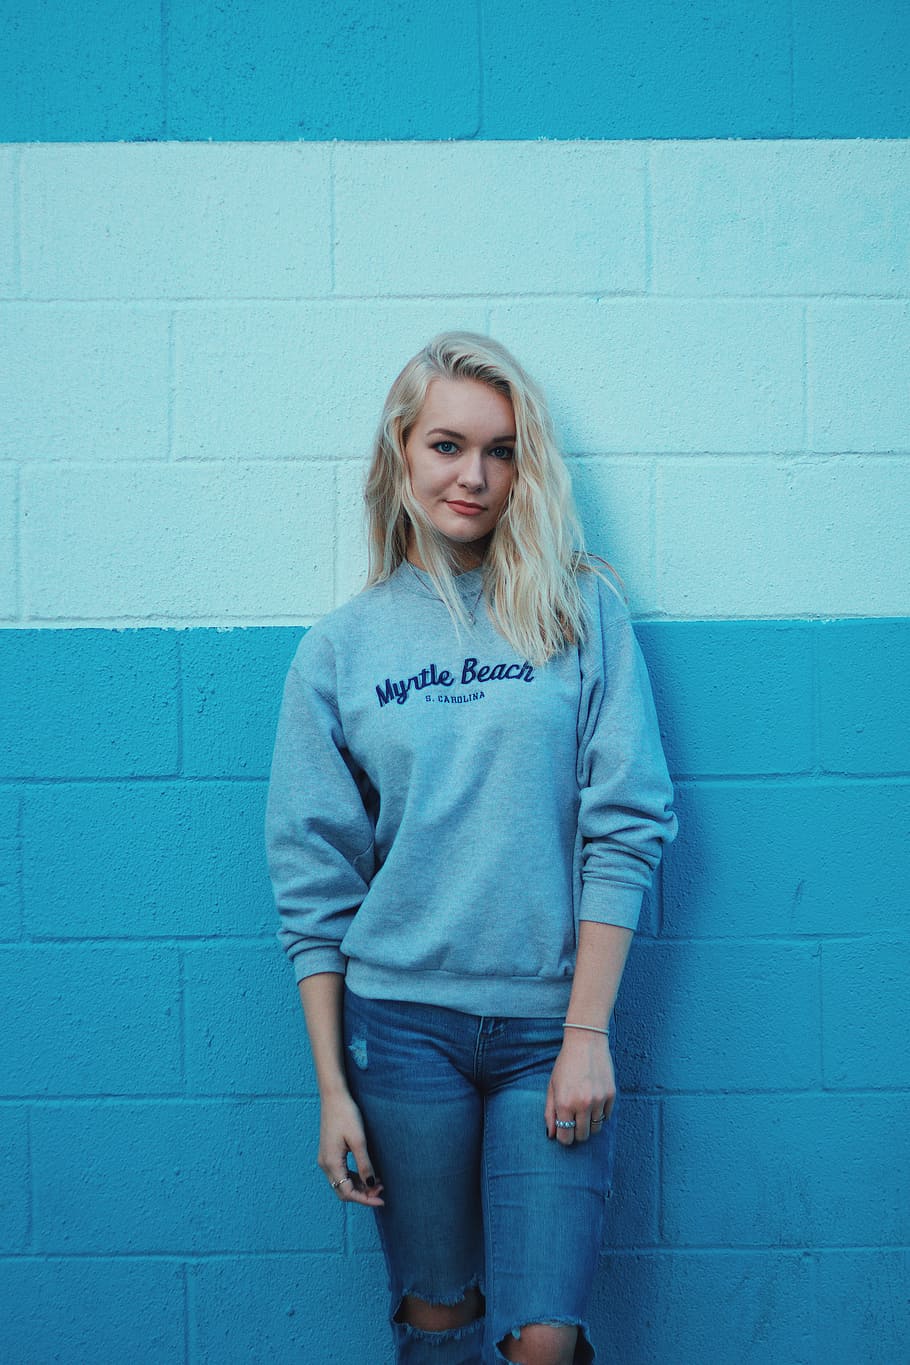 woman in teal sweater and blue jeans, woman leaning on blue and white wall